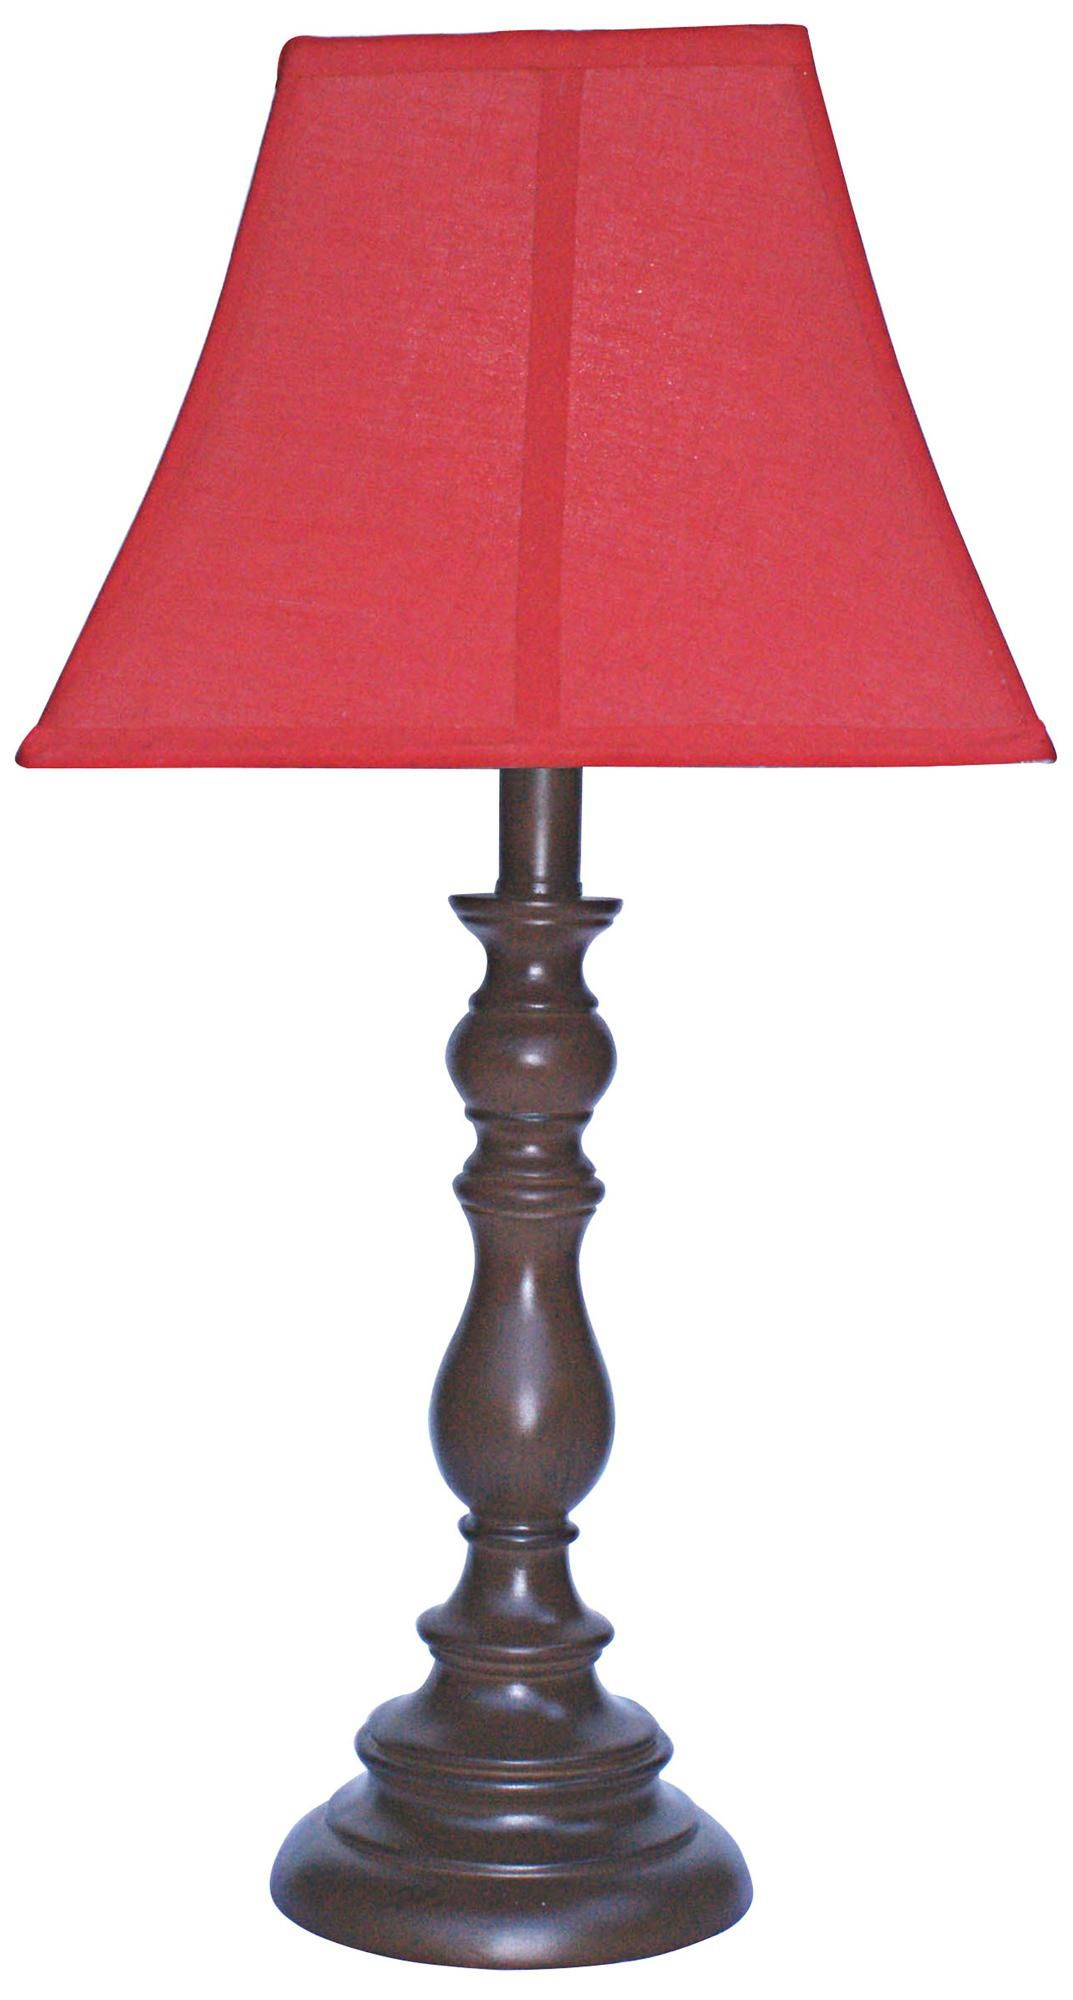 Red Shade With Brown Candlestick Base Table Lamp For throughout dimensions 1073 X 2000